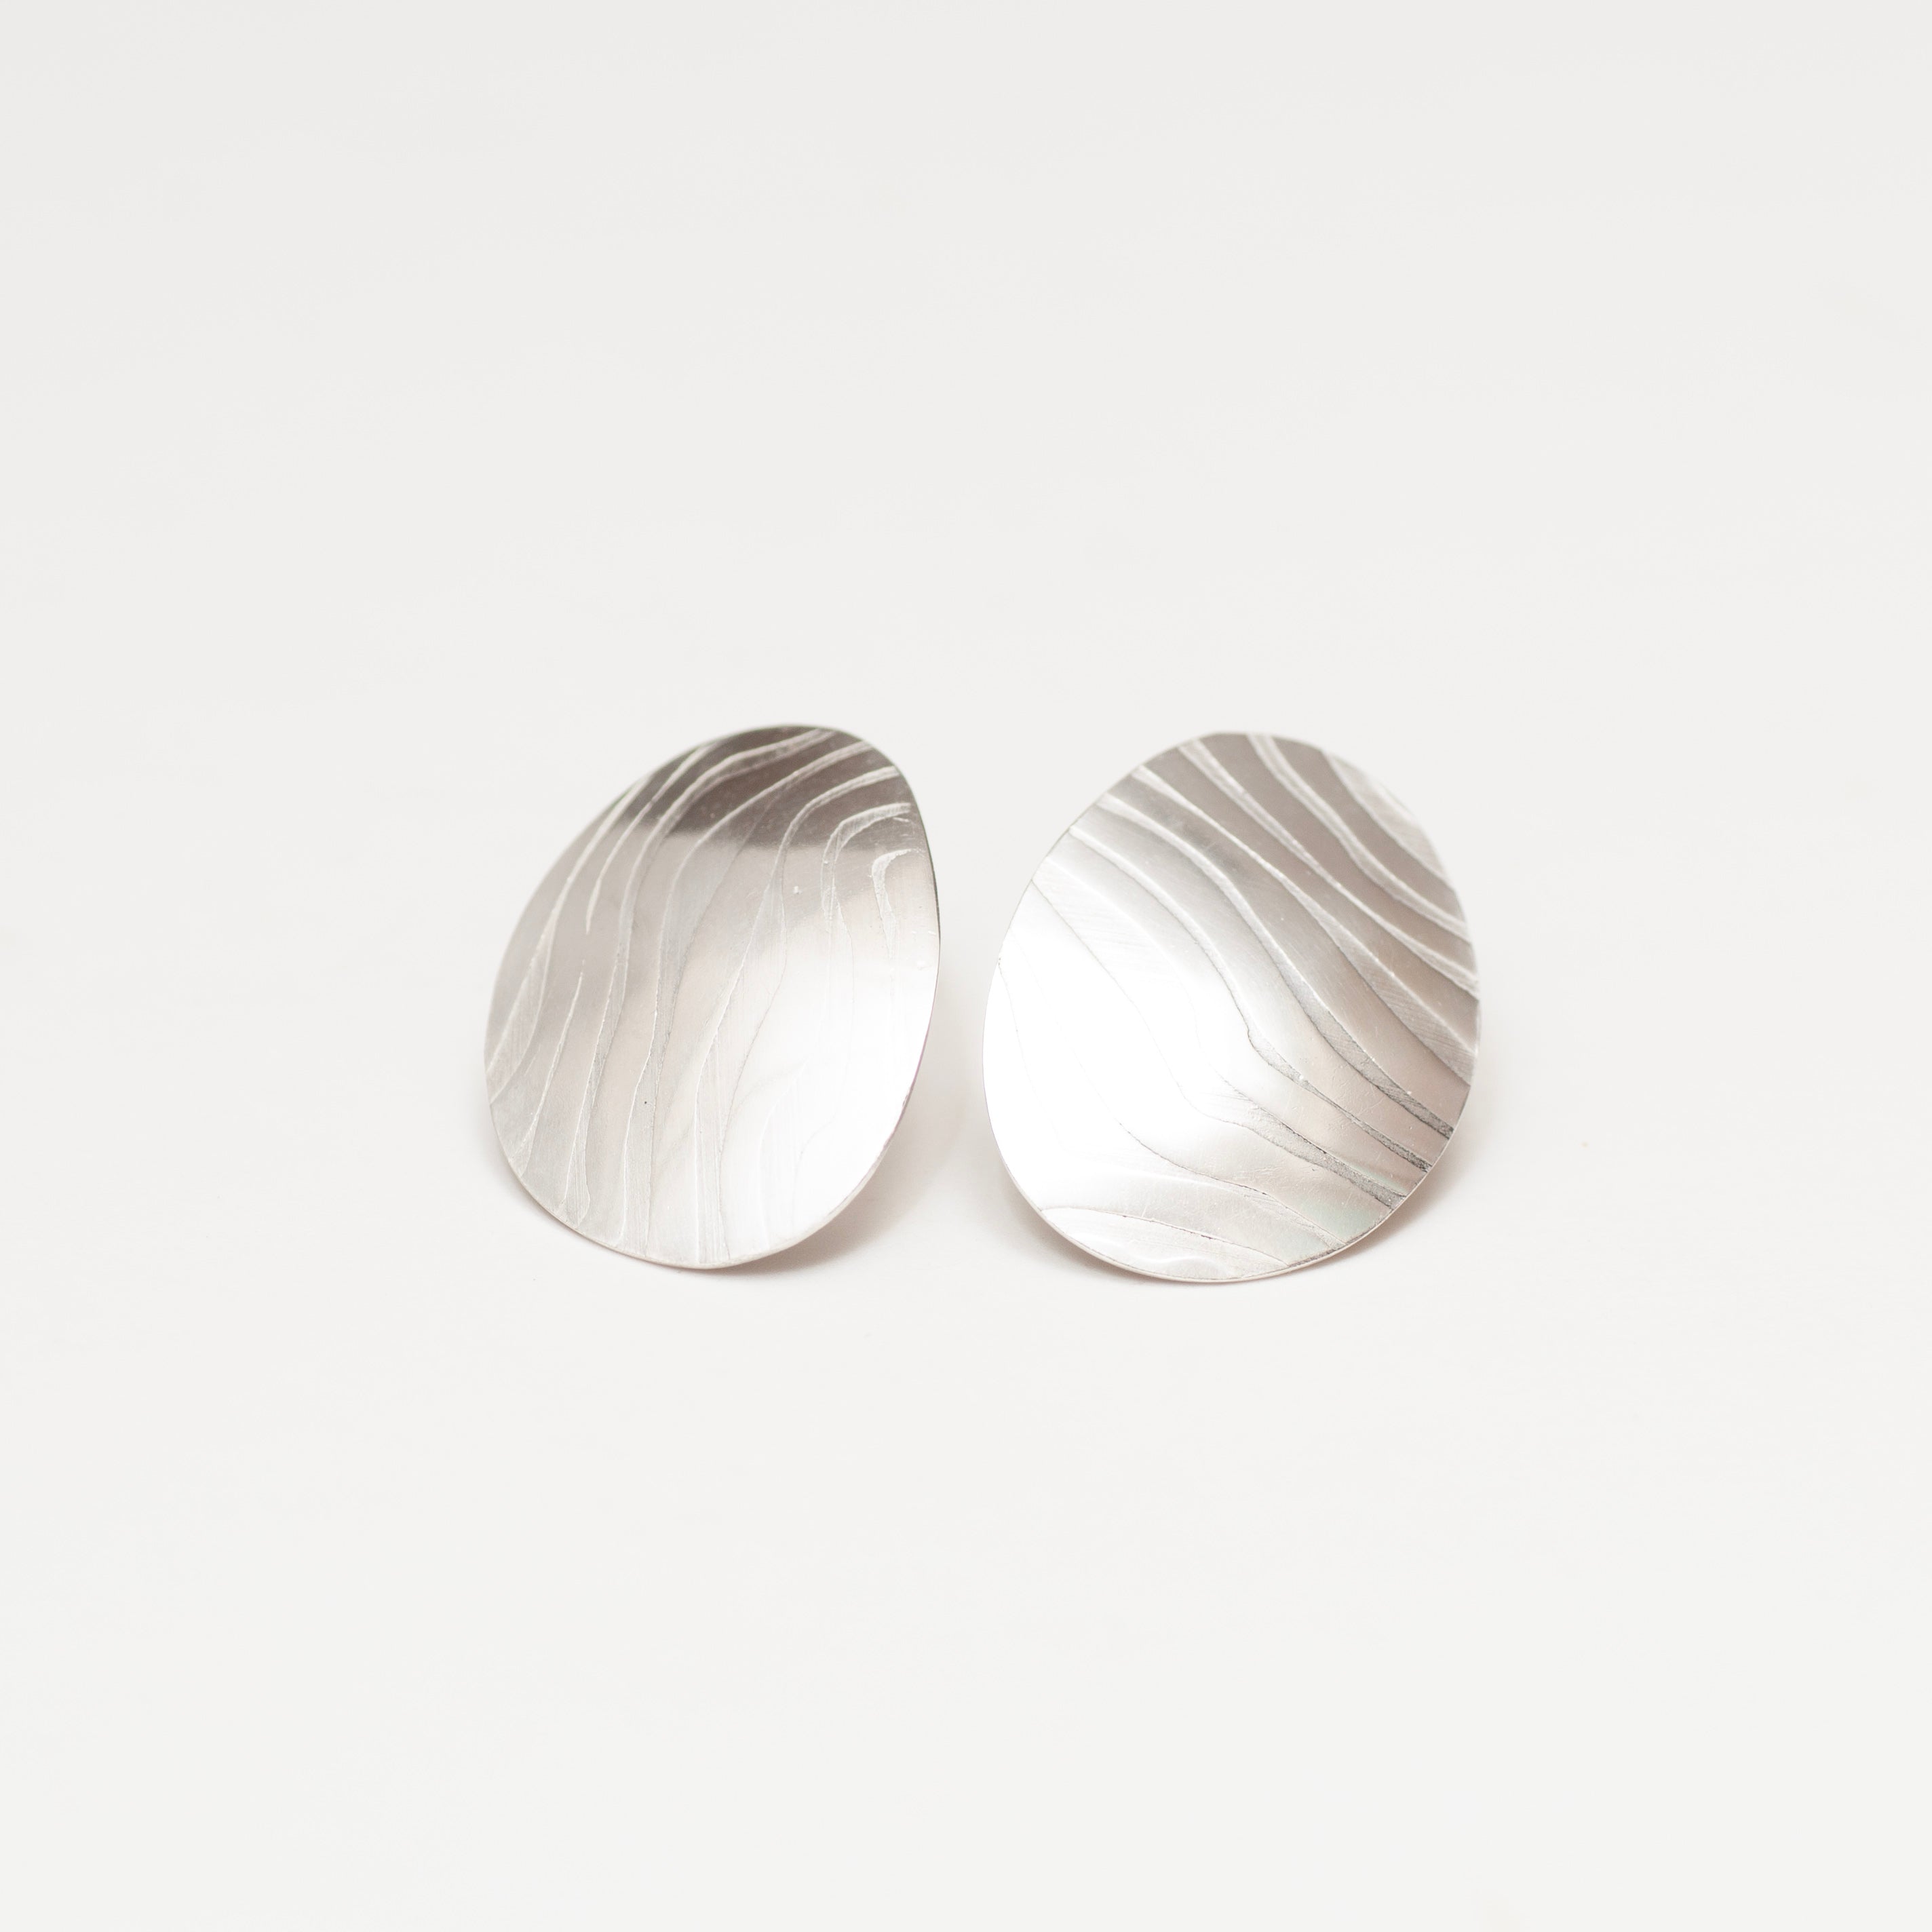 Ripple Collection - Pebble Studs